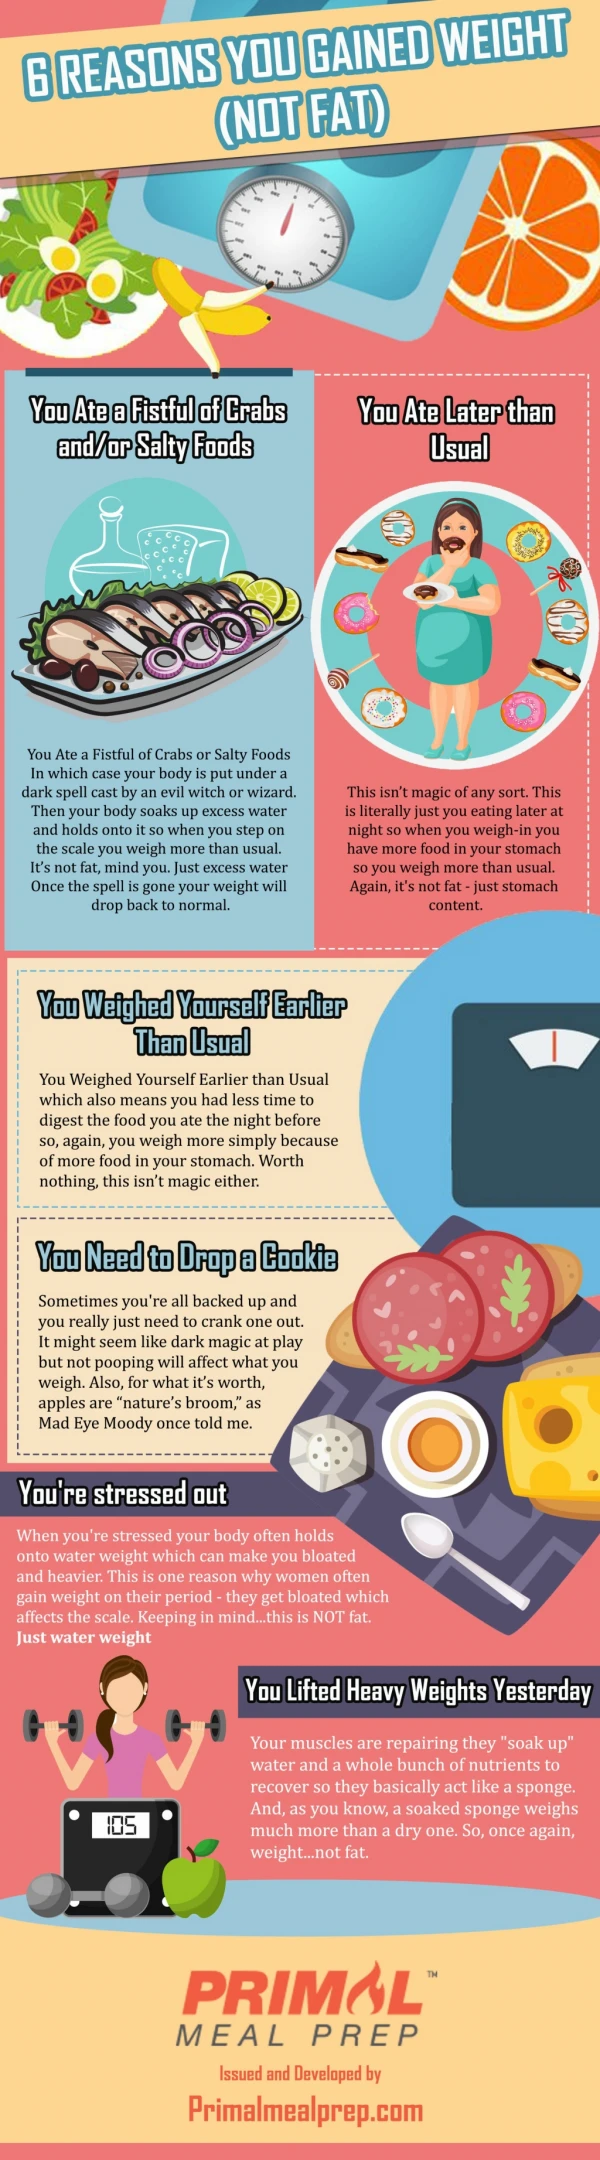 6 Reasons You Gained Weight & Not Fat